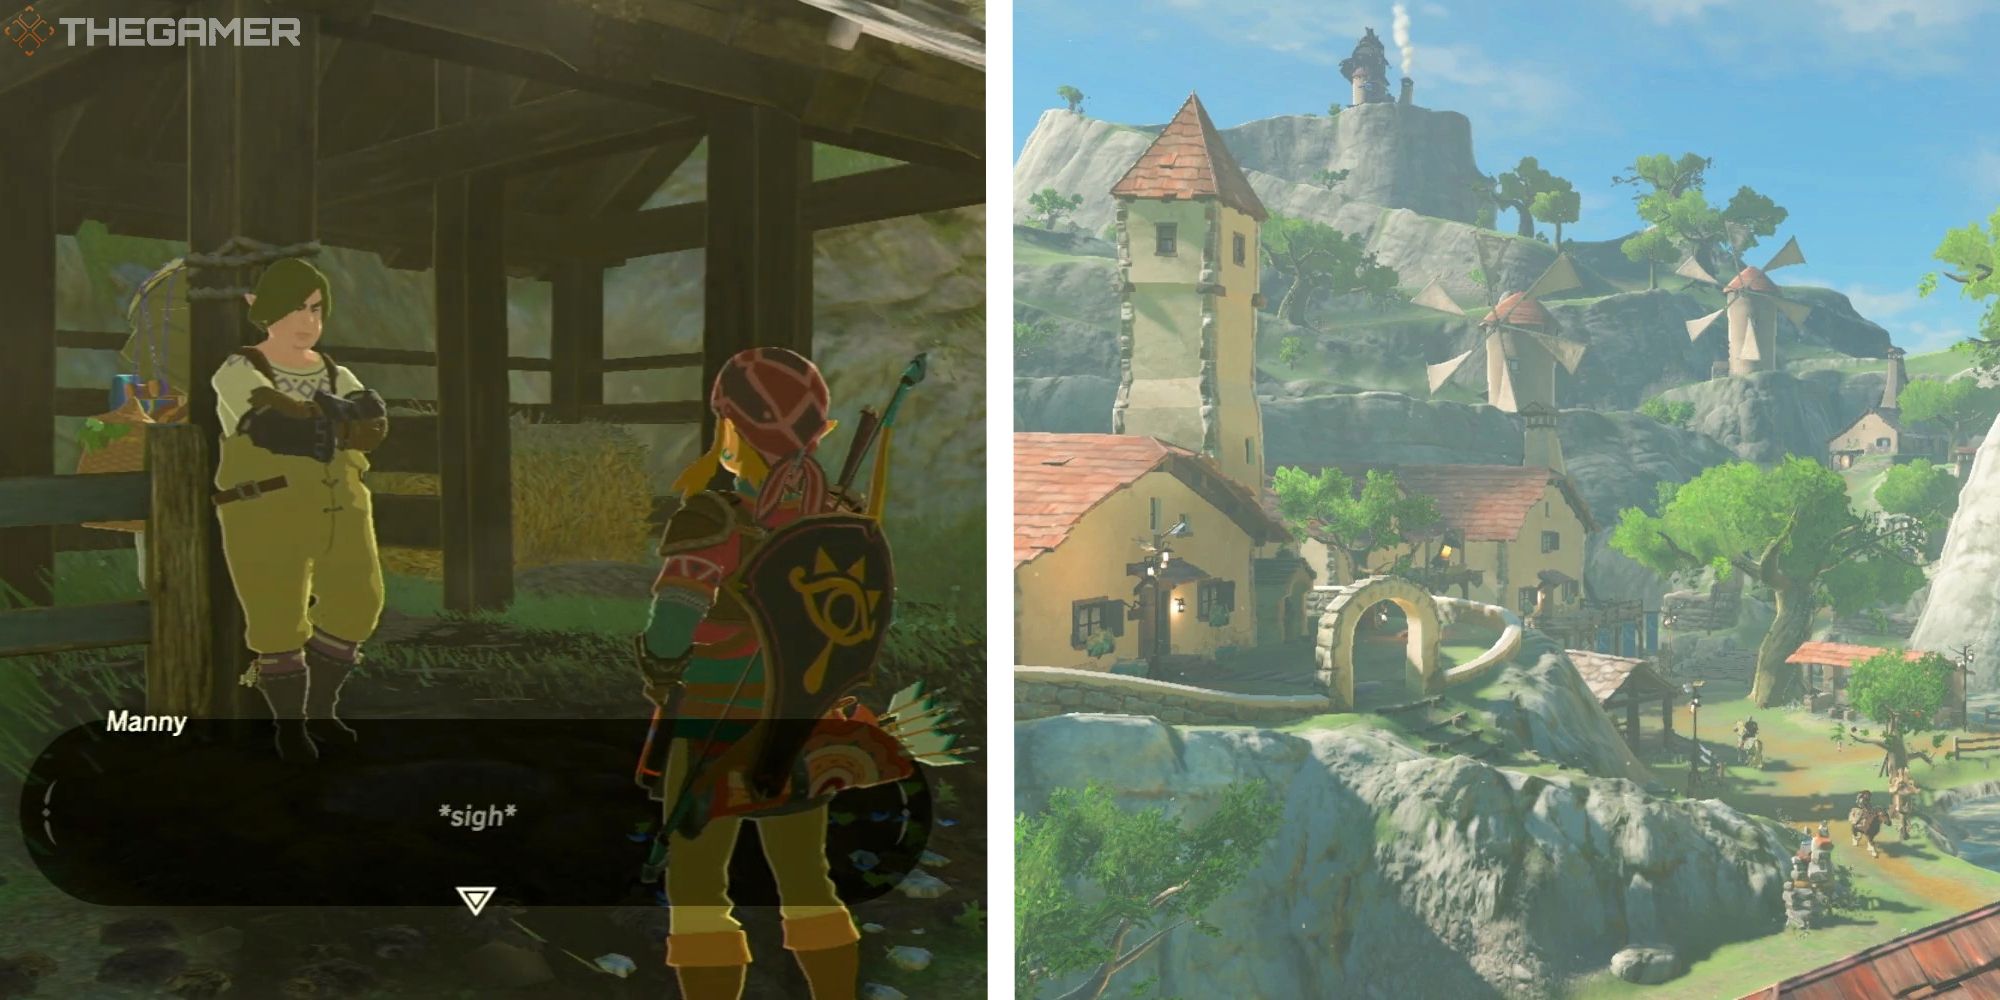 image of link speaking with manny, next to image of hateno village